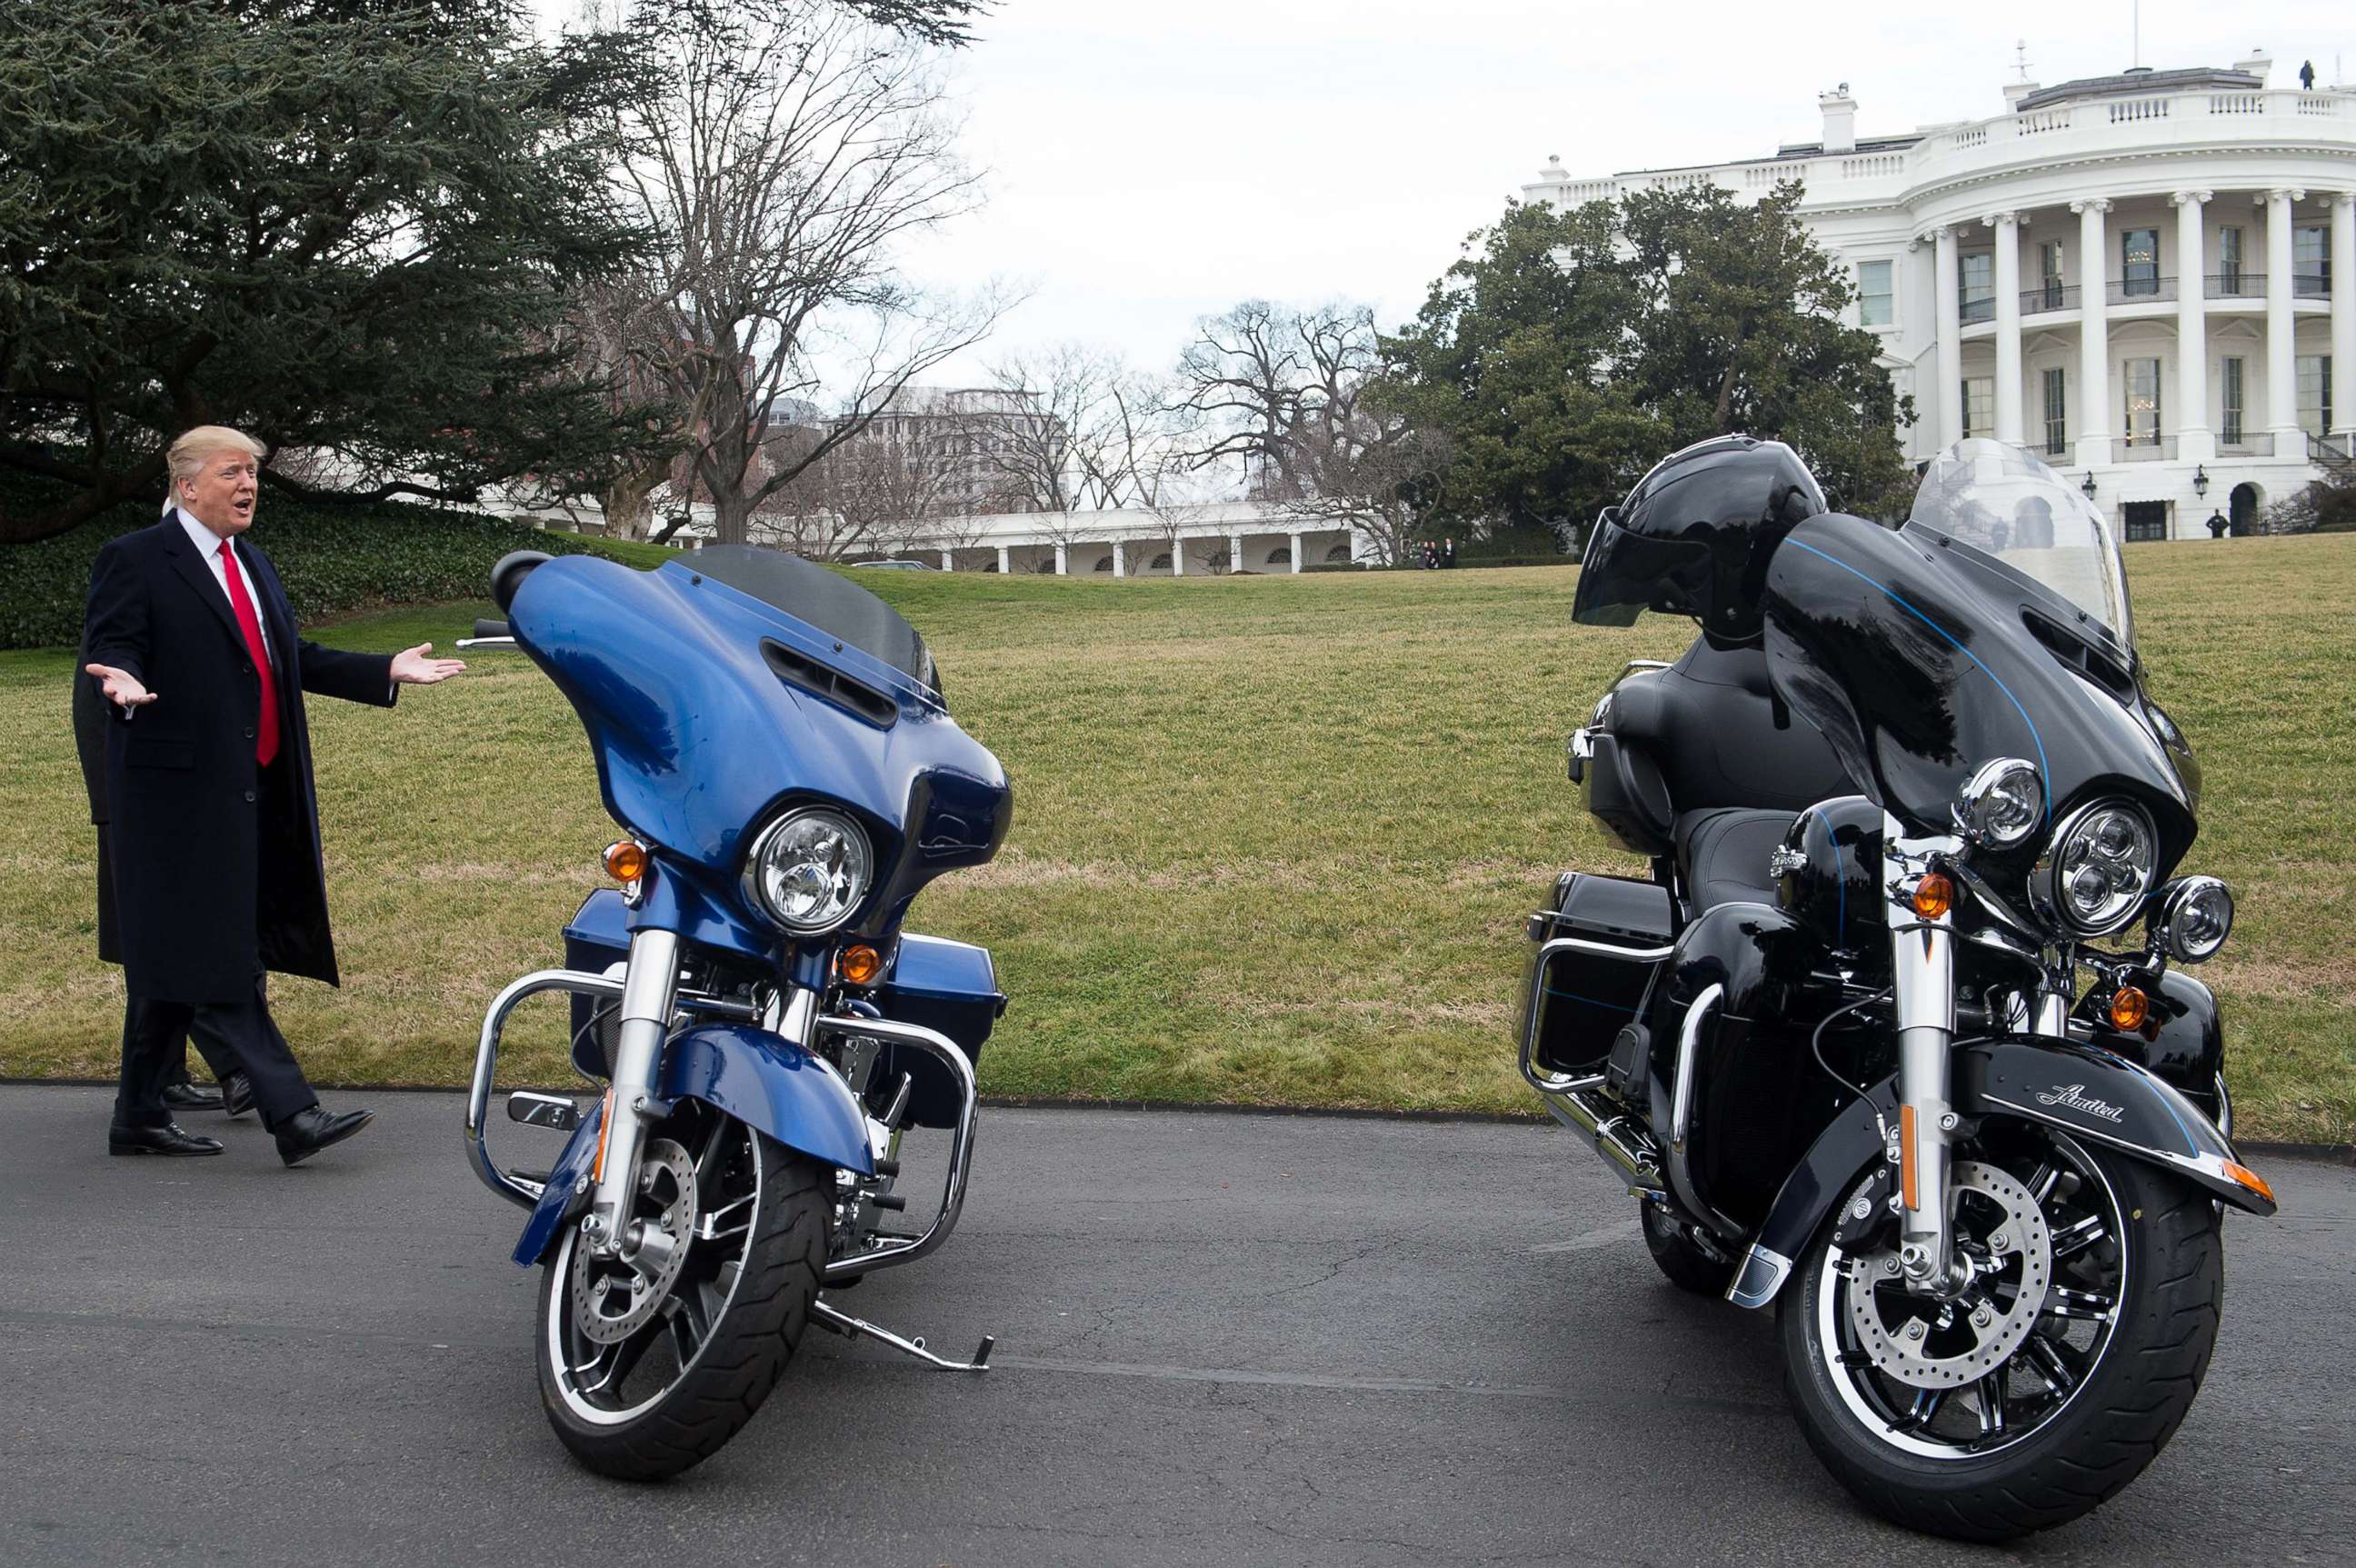 PHOTO: President Donald Trump arrives to meet with Harley Davidson executives and union representatives on the South Lawn of the White House in Washington, D.C., Feb. 2, 2017.